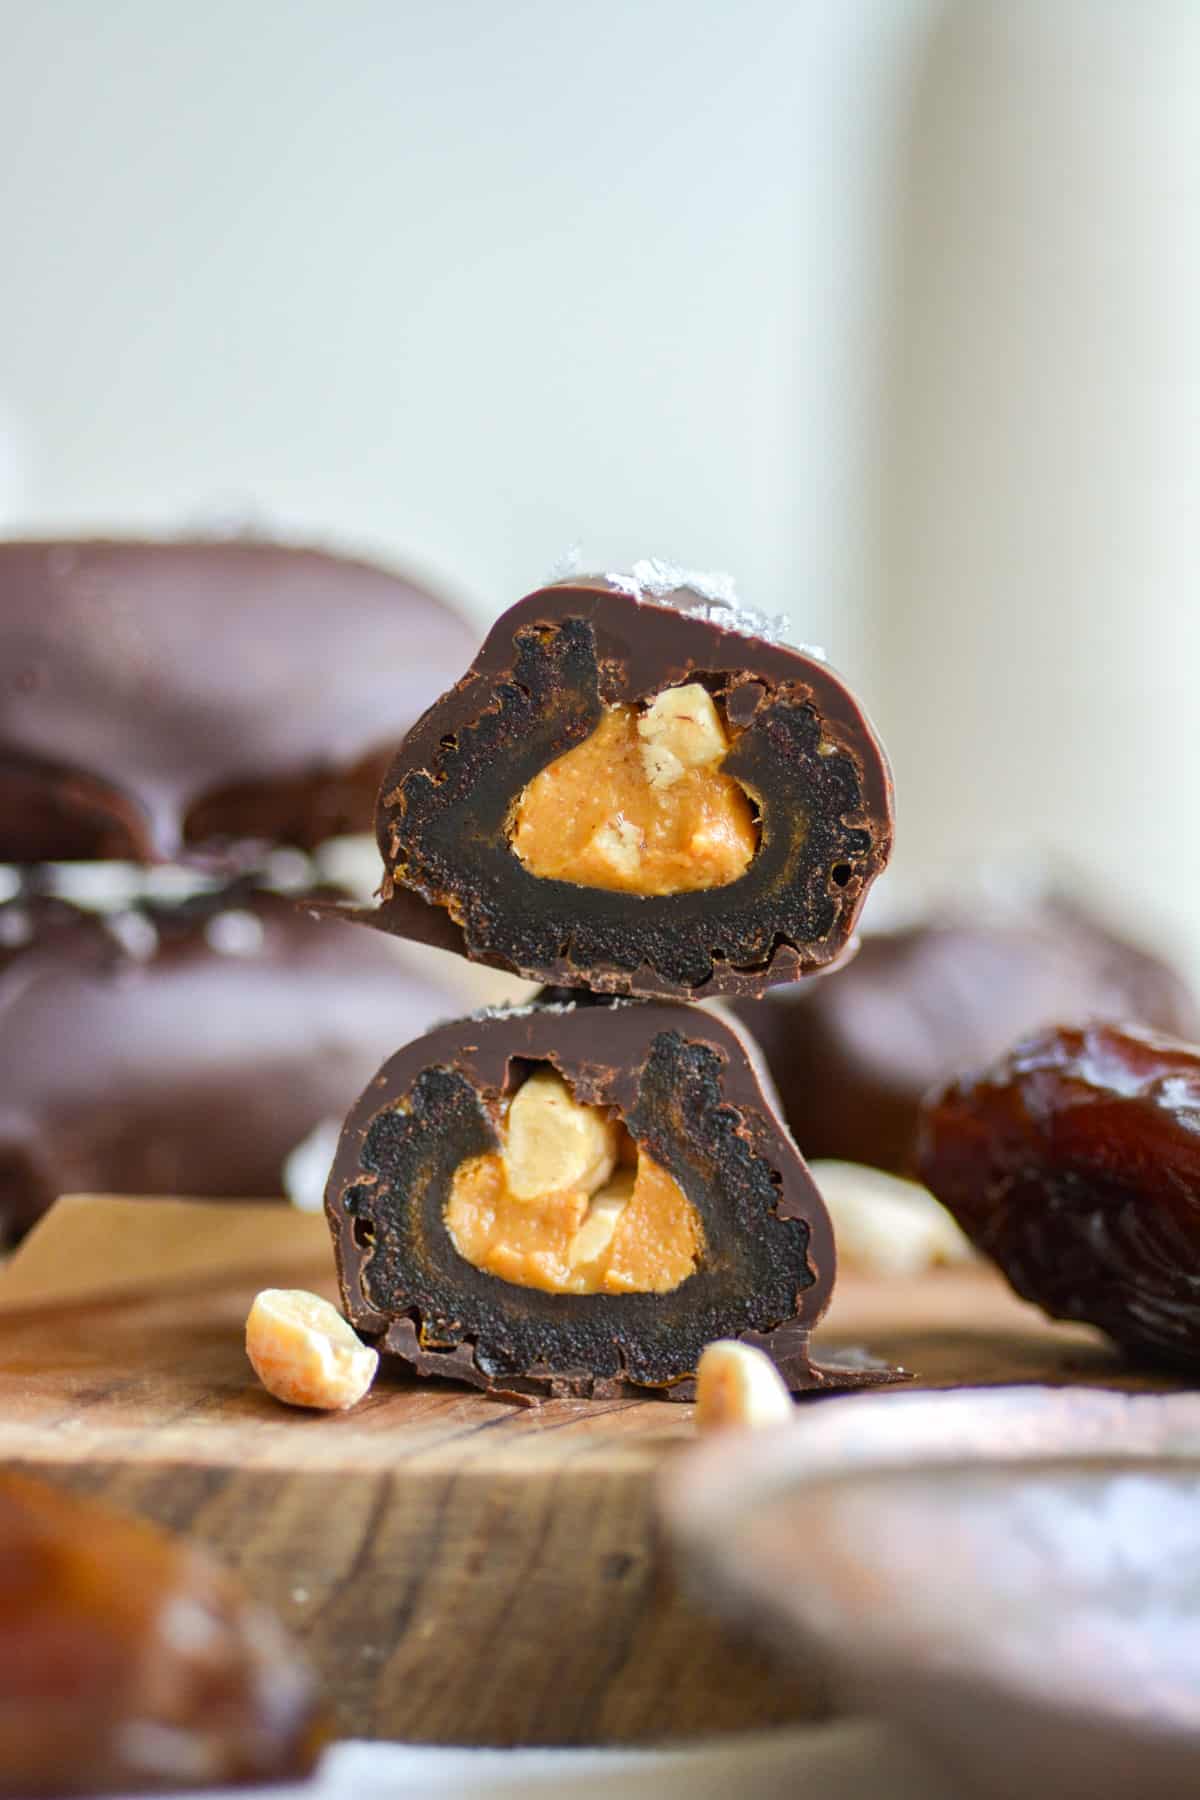 A chocolate covered date stuffed with peanut butter cut in half and stacked on top of each other on a wooden board.